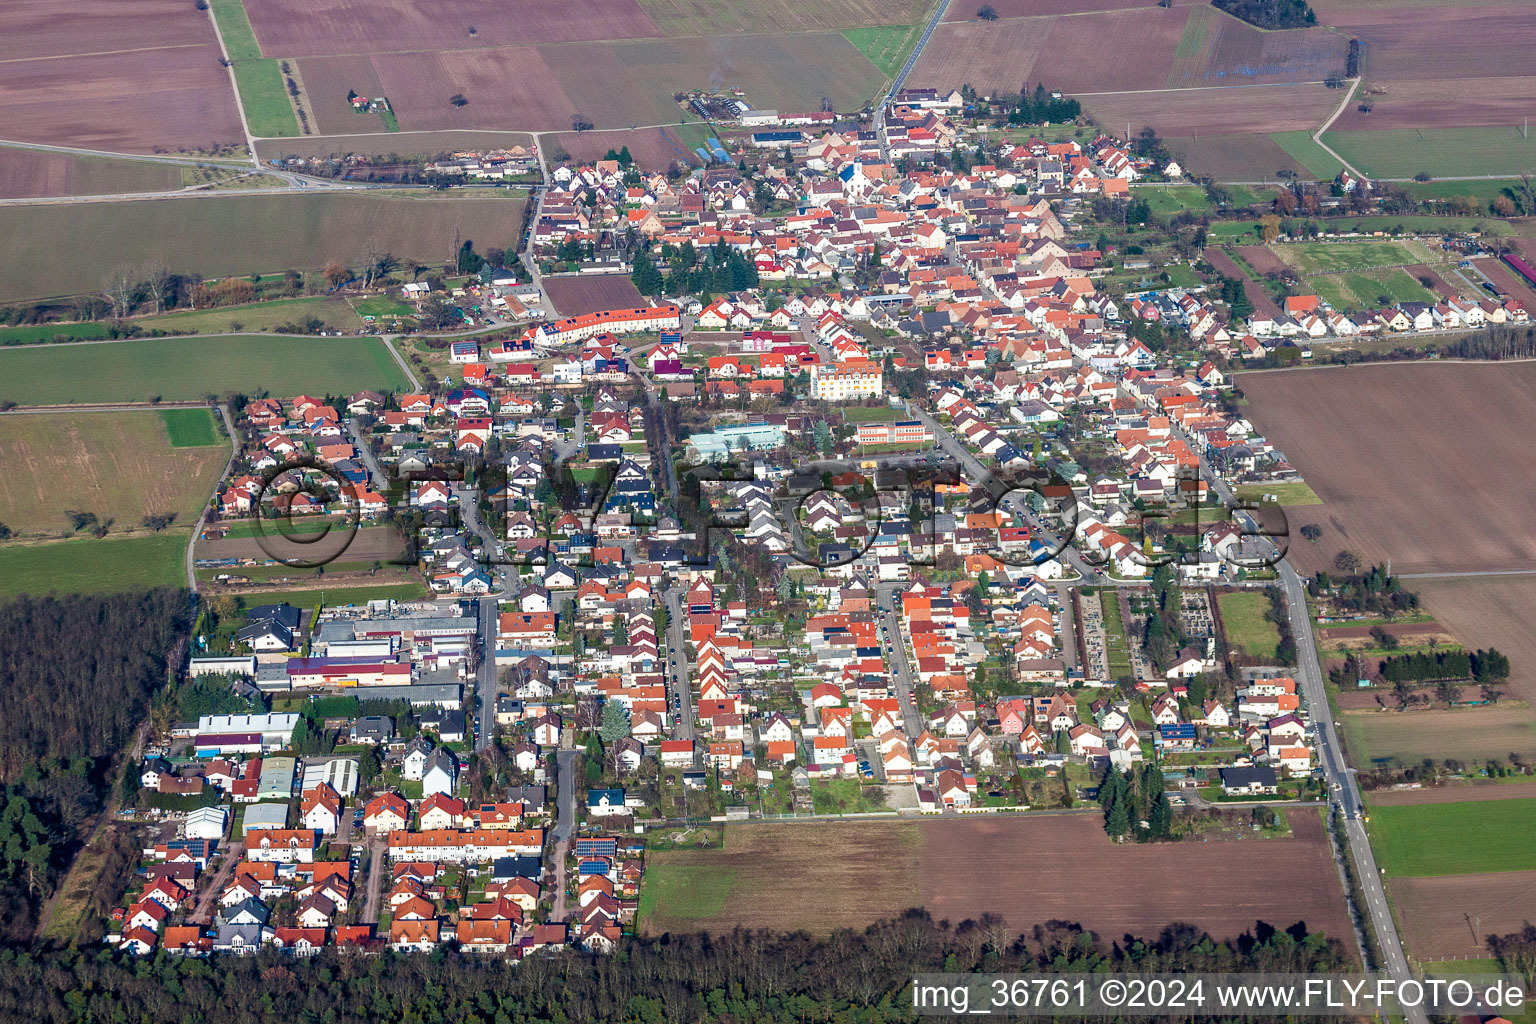 Aerial view of Village - view on the edge of agricultural fields and farmland in Westheim (Pfalz) in the state Rhineland-Palatinate, Germany